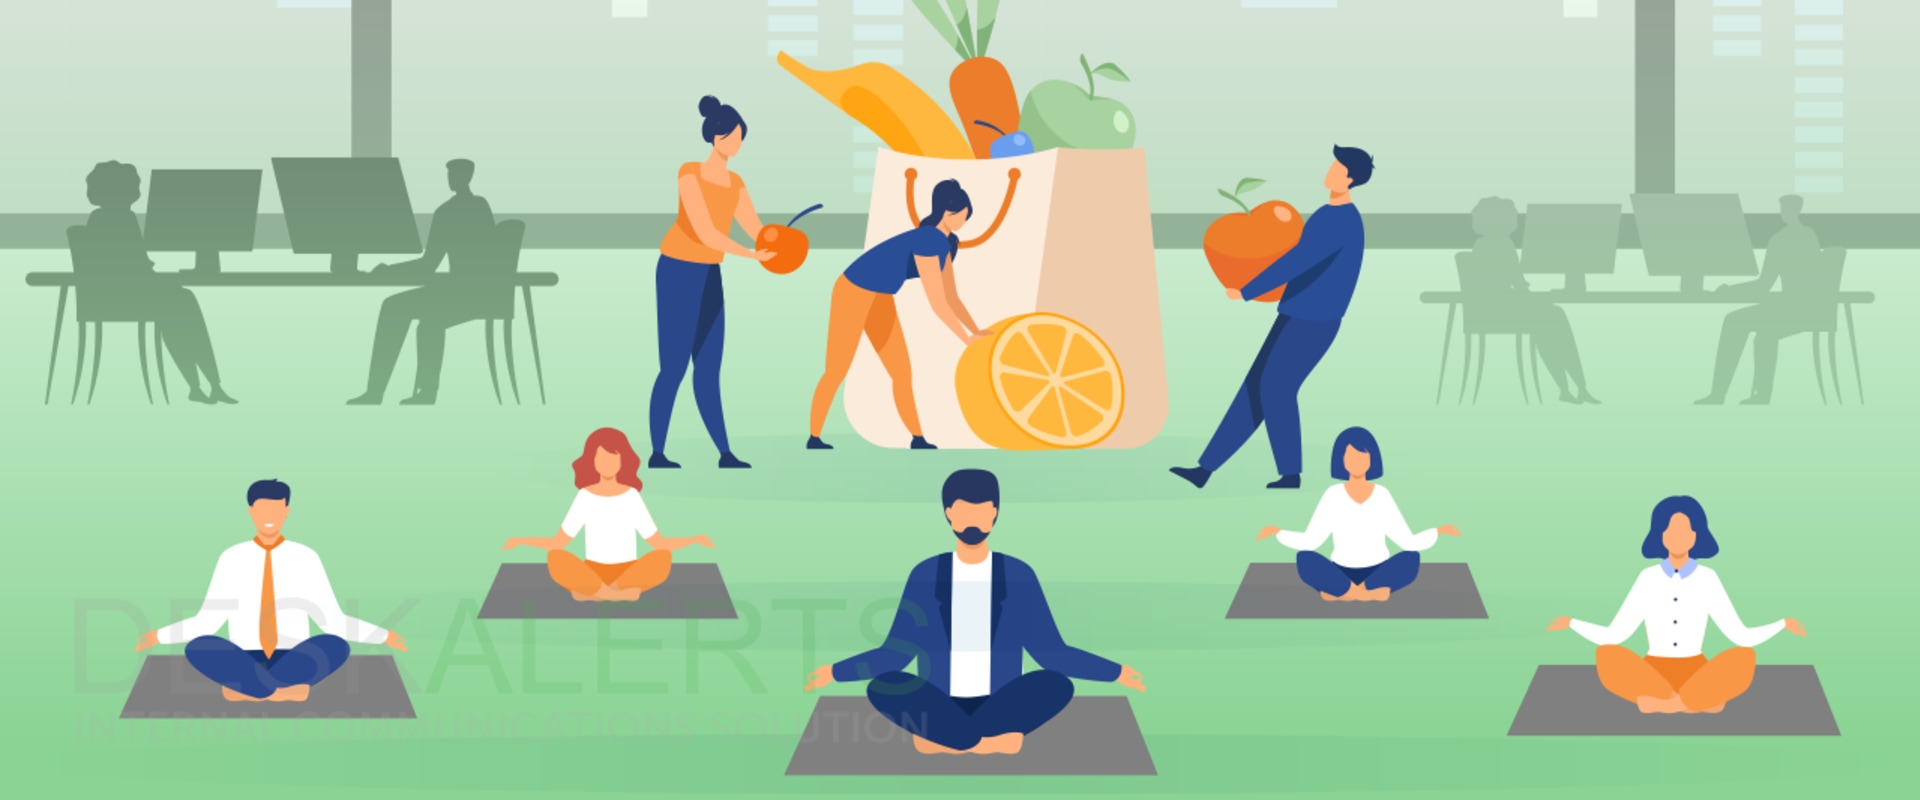 Providing Resources for Work-Life Balance Support: Strategies for Employee Wellbeing and a Positive Workplace Culture